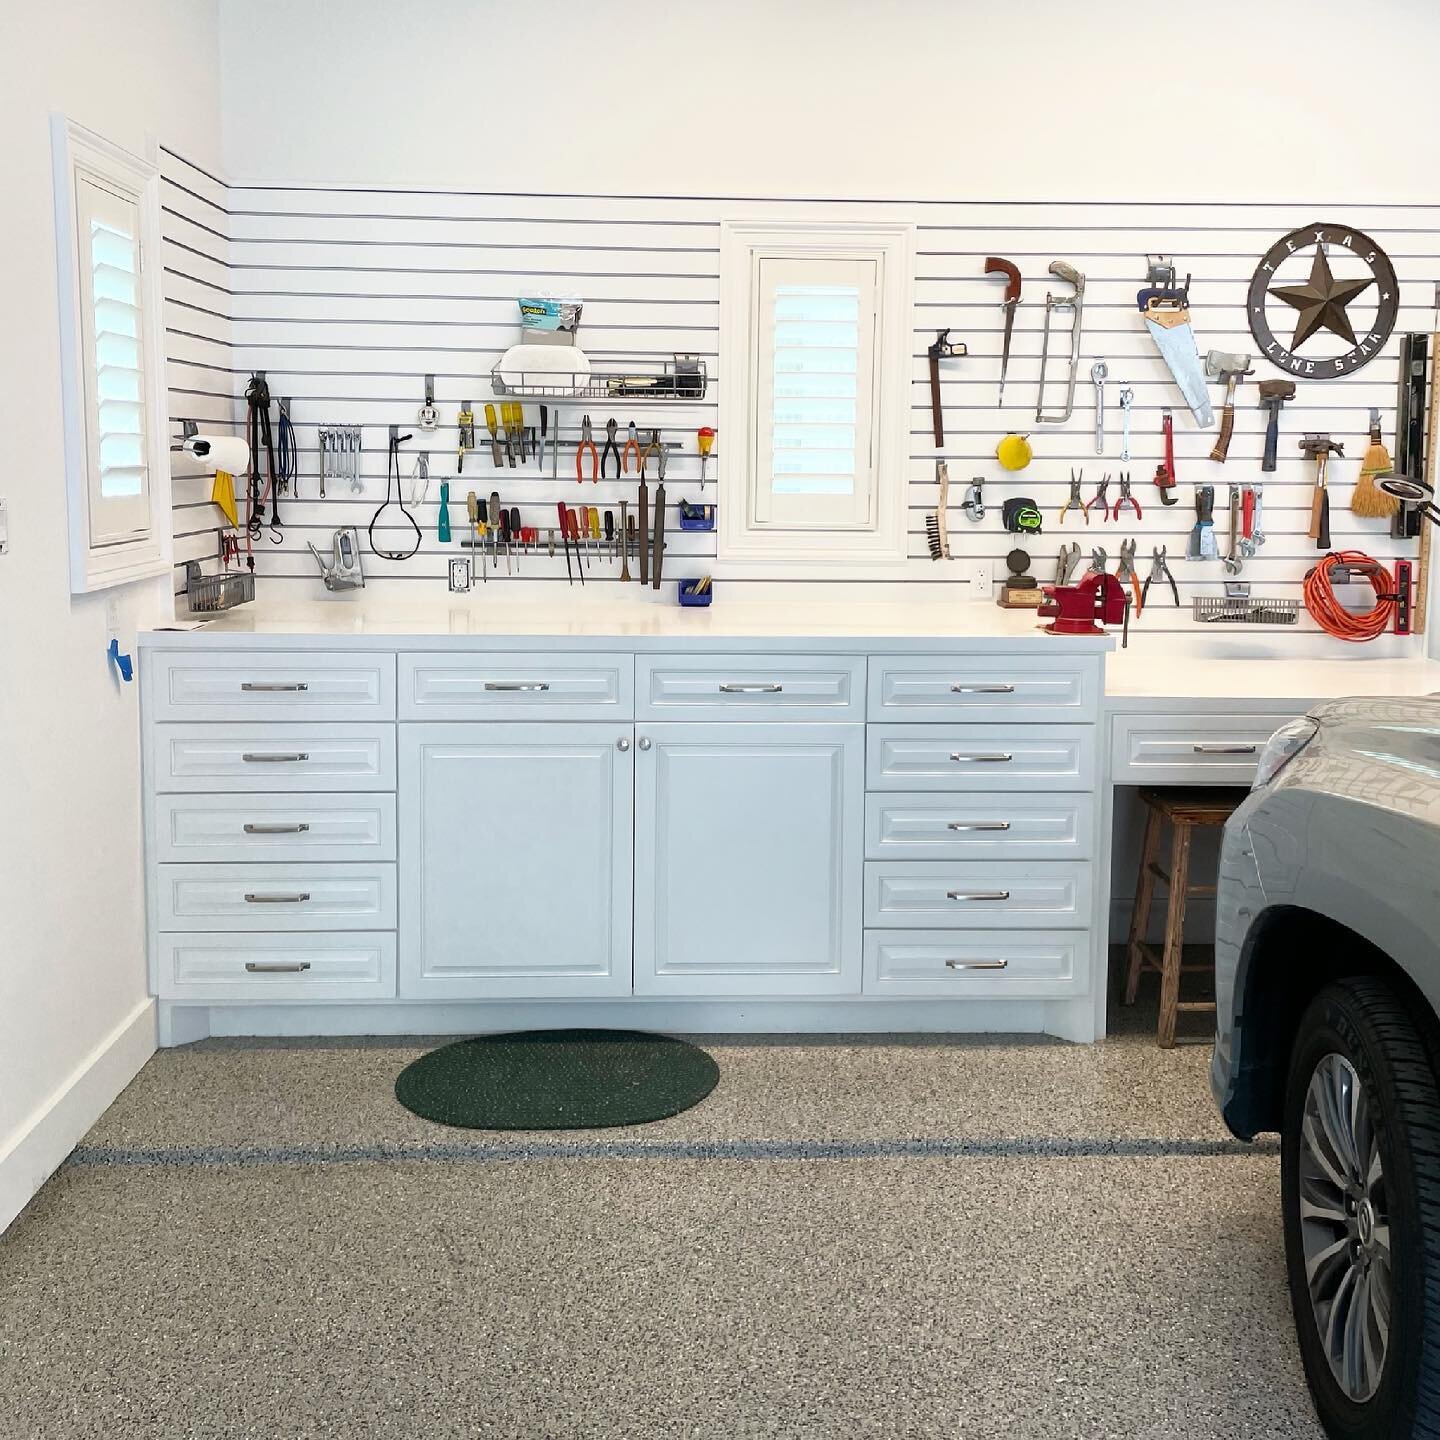 School&rsquo;s out, tools out 🛠! 
.
.
#crosswellorganizing #garage #organization #garageorganization #garagestorage #tools #slatwall